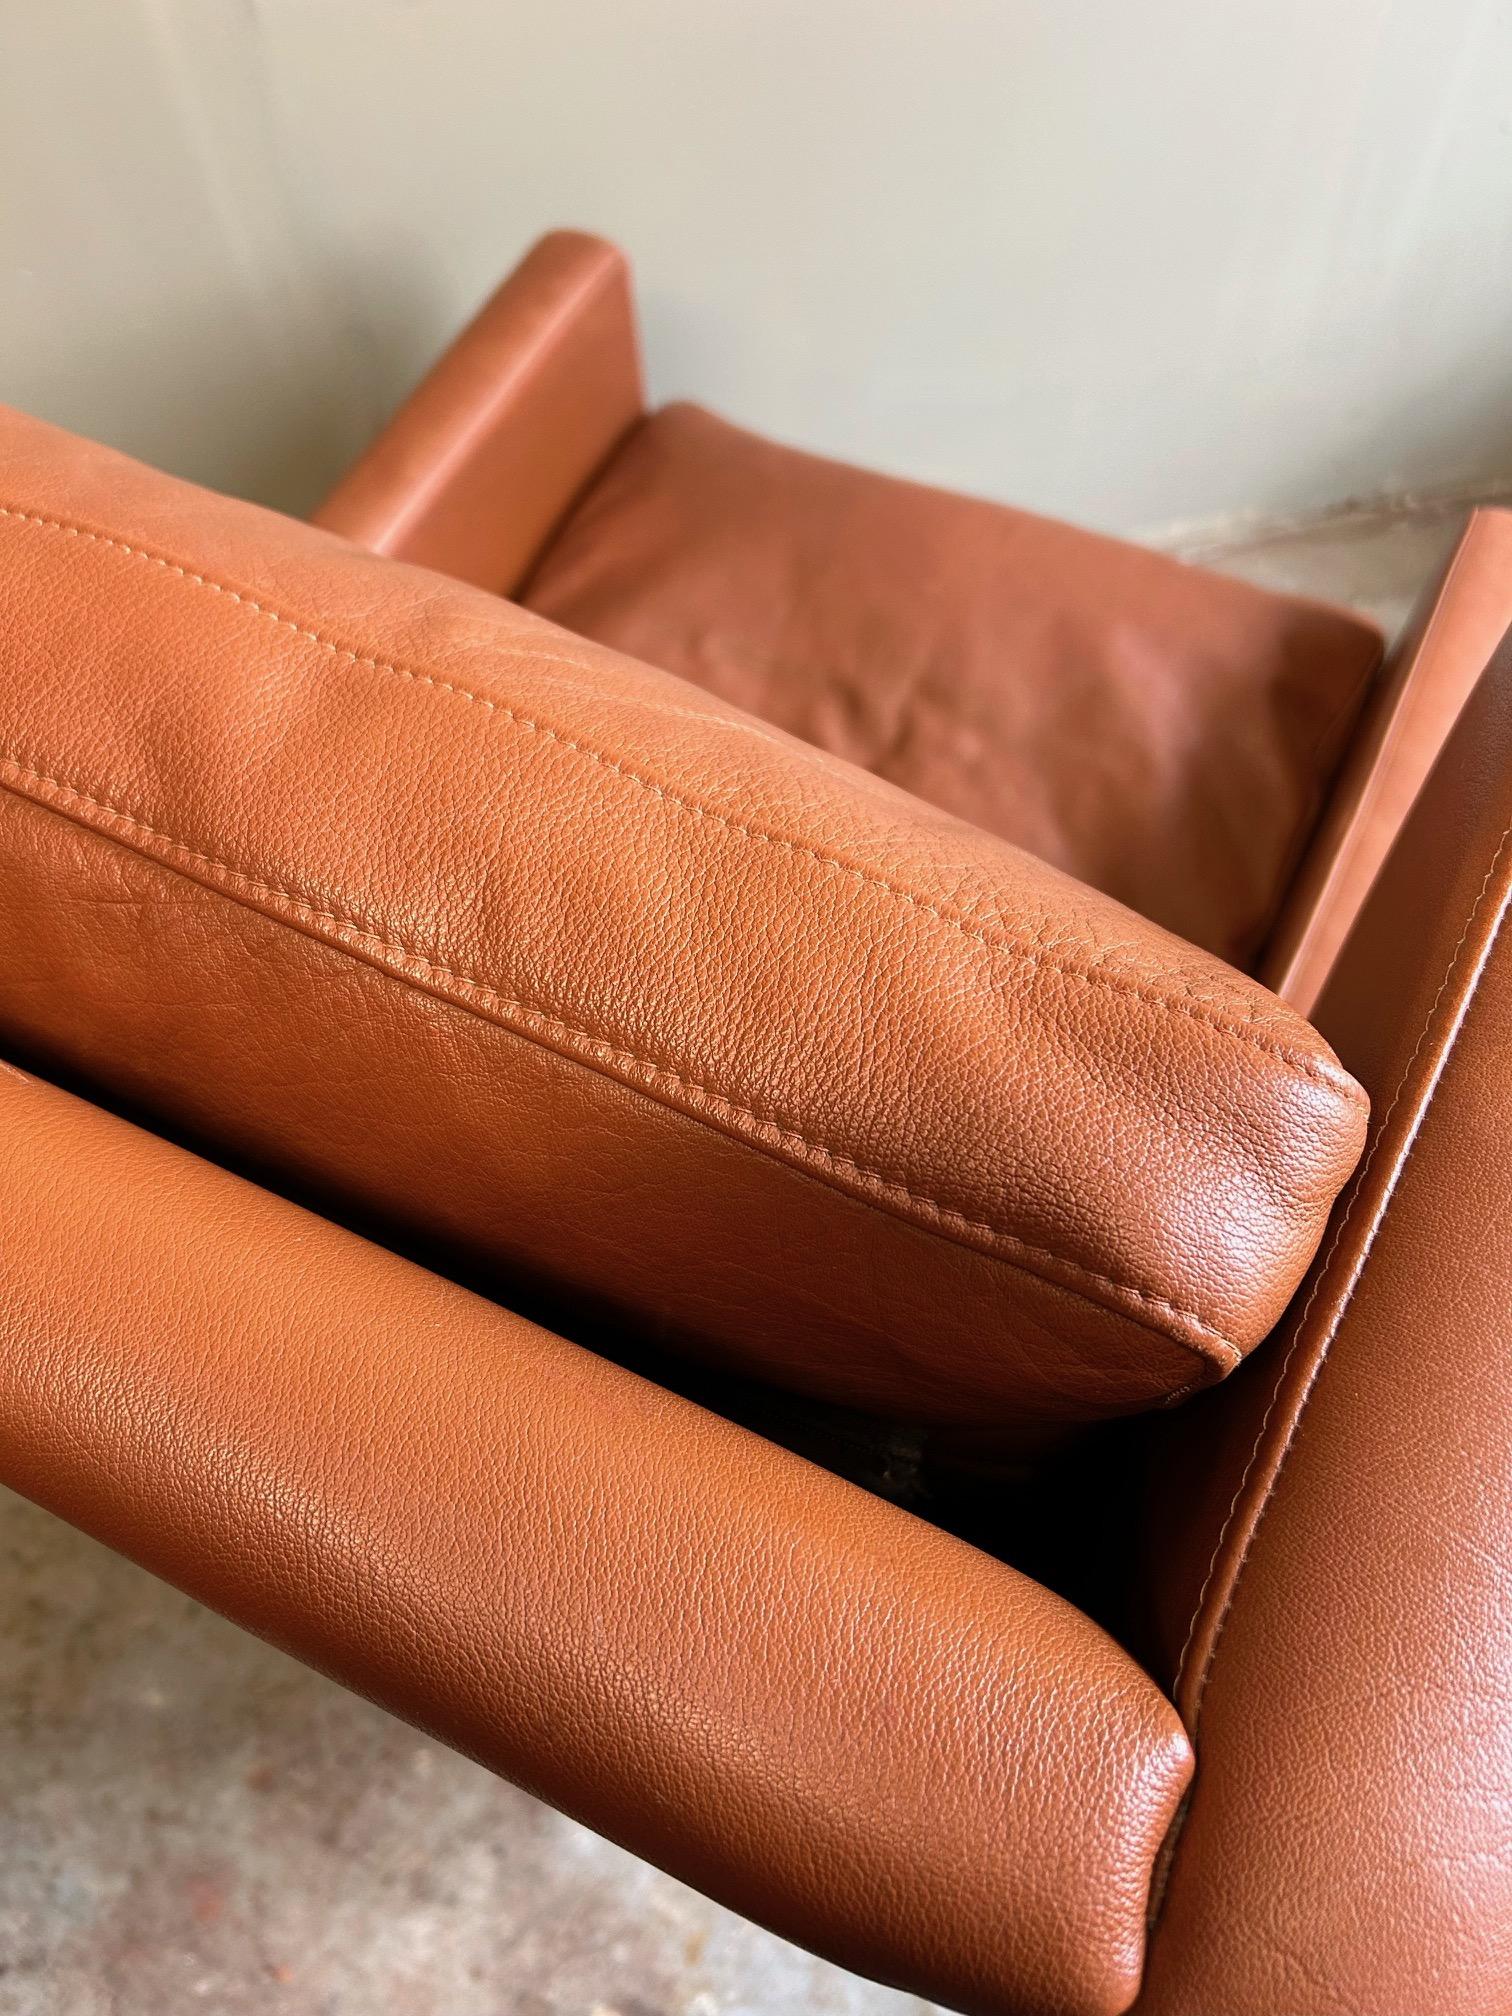 A beautiful Danish tan leather highback armchair by Stouby, this would make a stylish addition to any living or work area.

The chair has a wide seat and padded backrest for enhanced comfort. A striking piece of classic Scandinavian furniture.

The